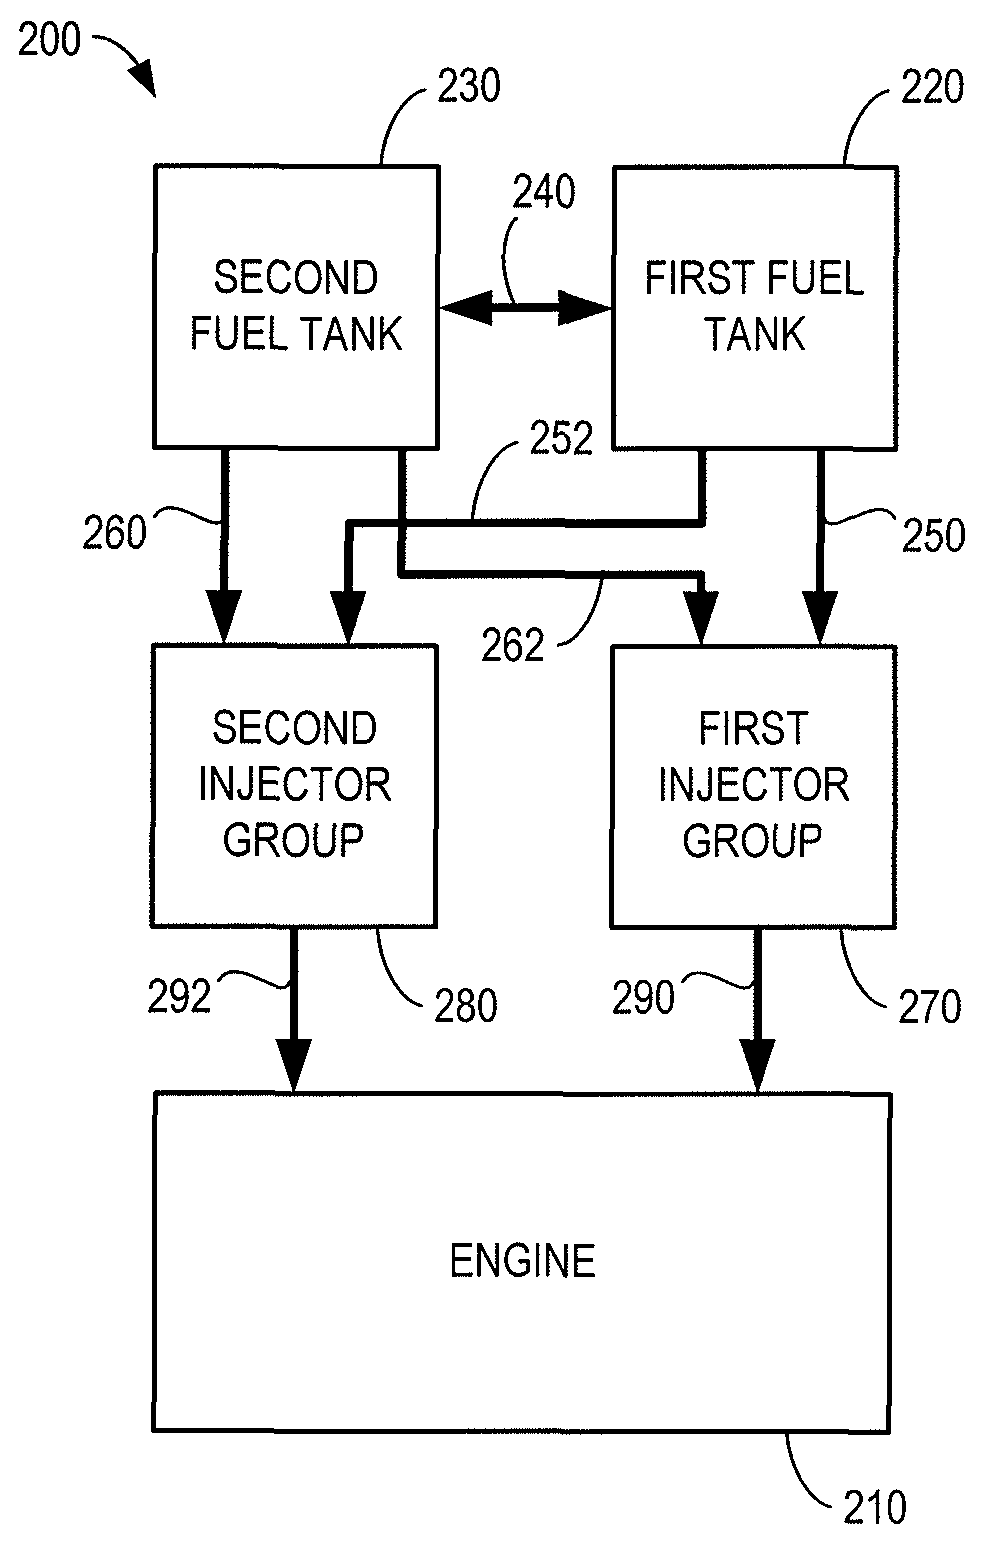 Engine boost control for multi-fuel engine